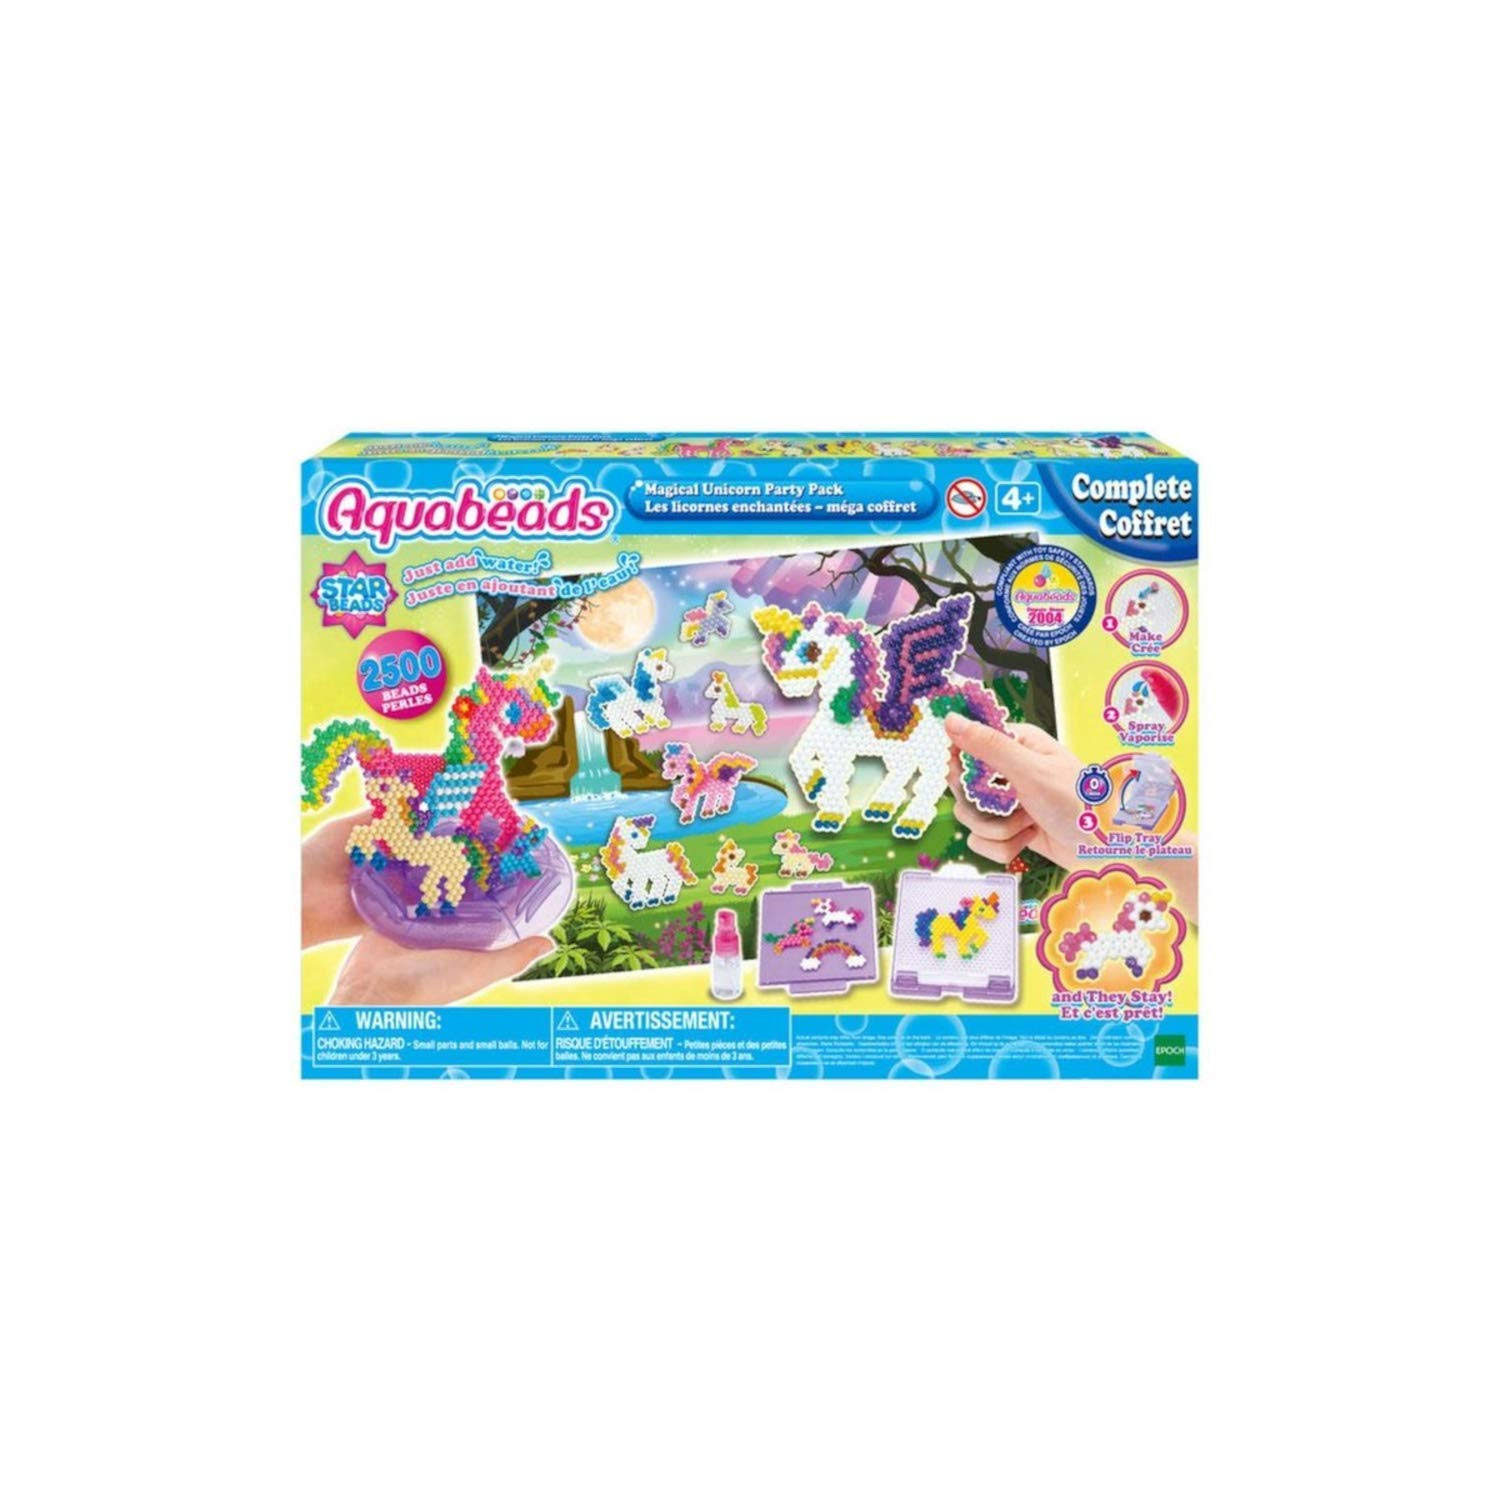 Aquabeads - 31742 | Magical Unicorn Party Pack